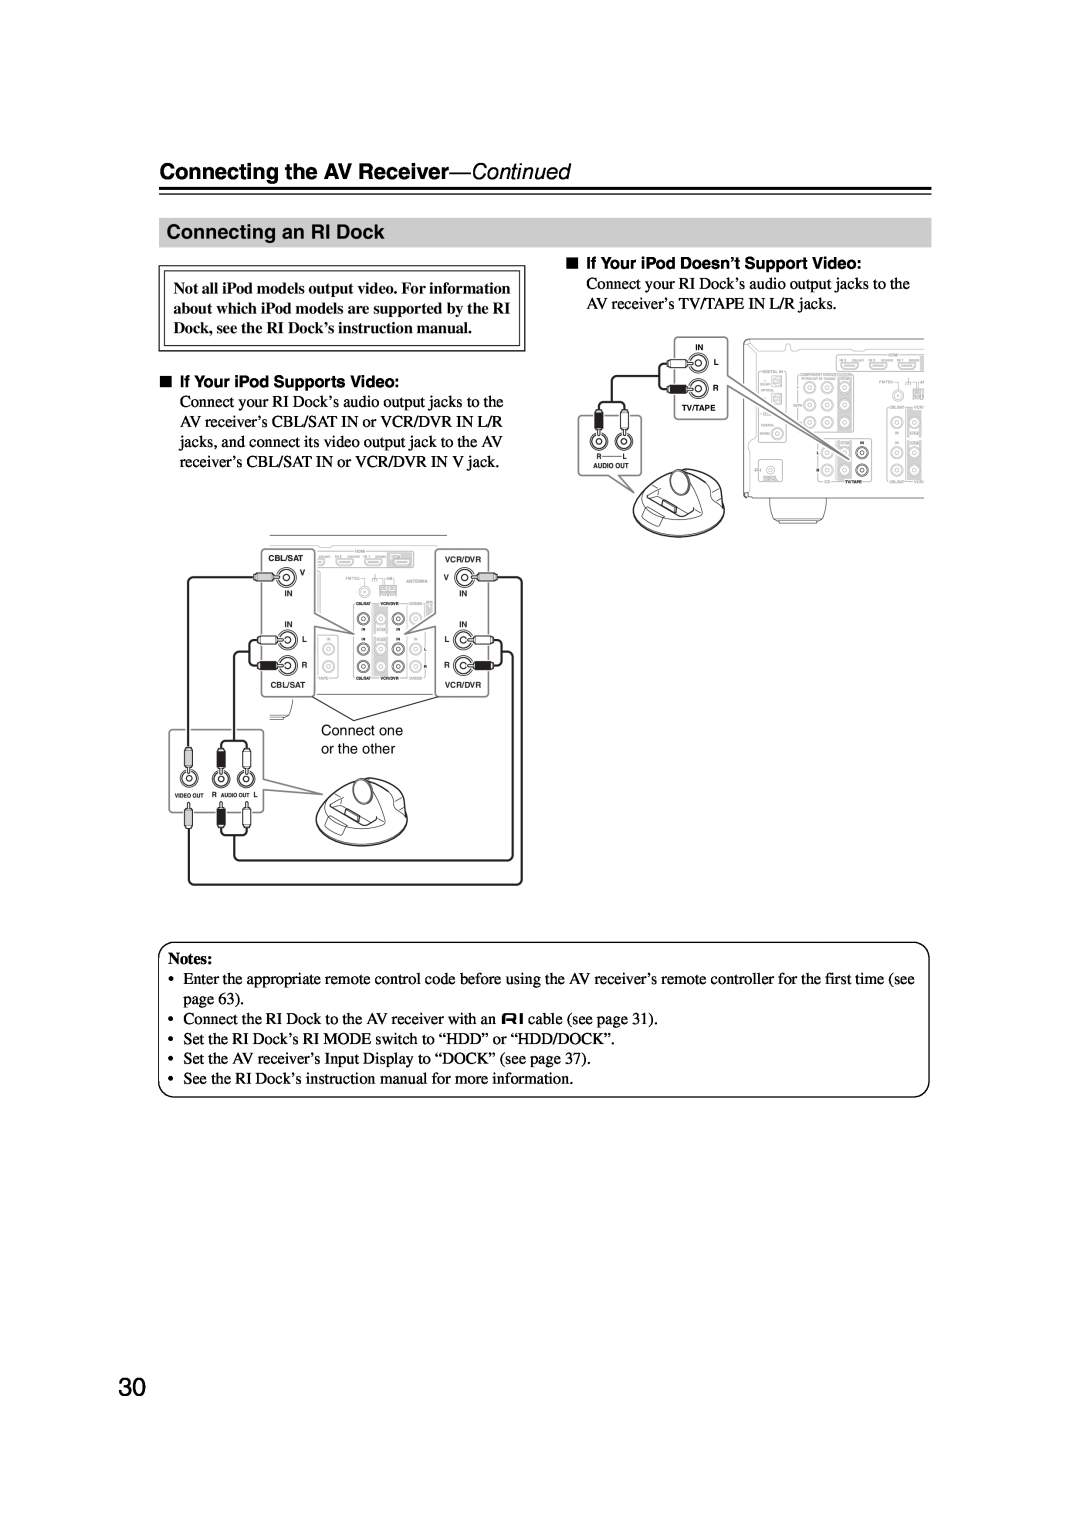 Onkyo TXSR307 instruction manual Connecting an RI Dock, Connecting the AV Receiver-Continued, If Your iPod Supports Video 